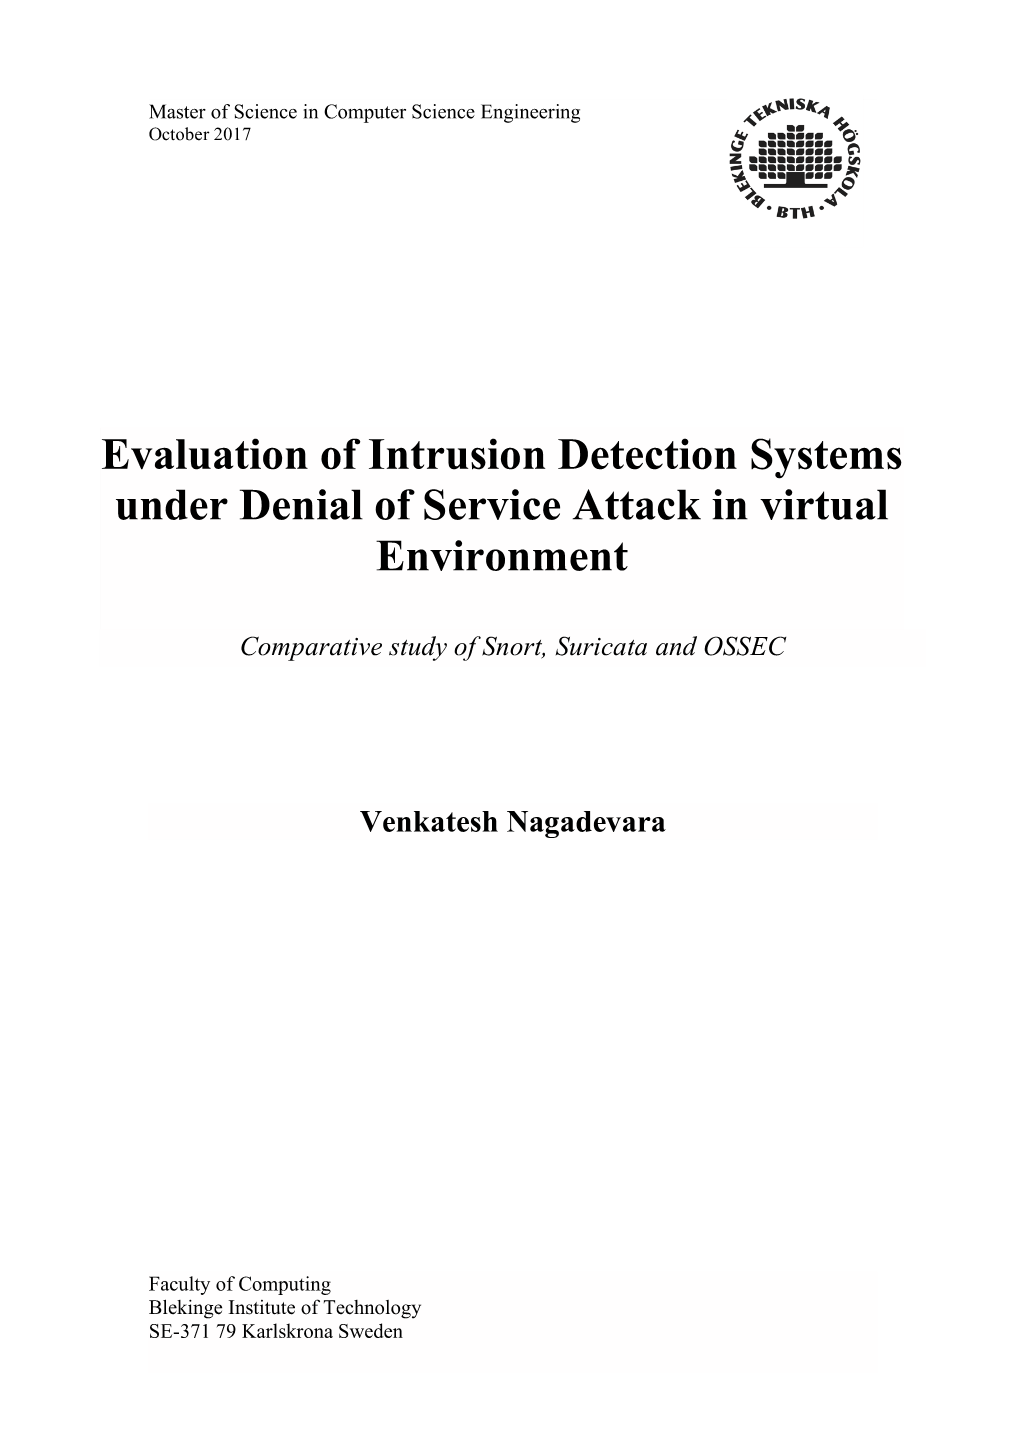 Evaluation of Intrusion Detection Systems Under Denial of Service Attack in Virtual